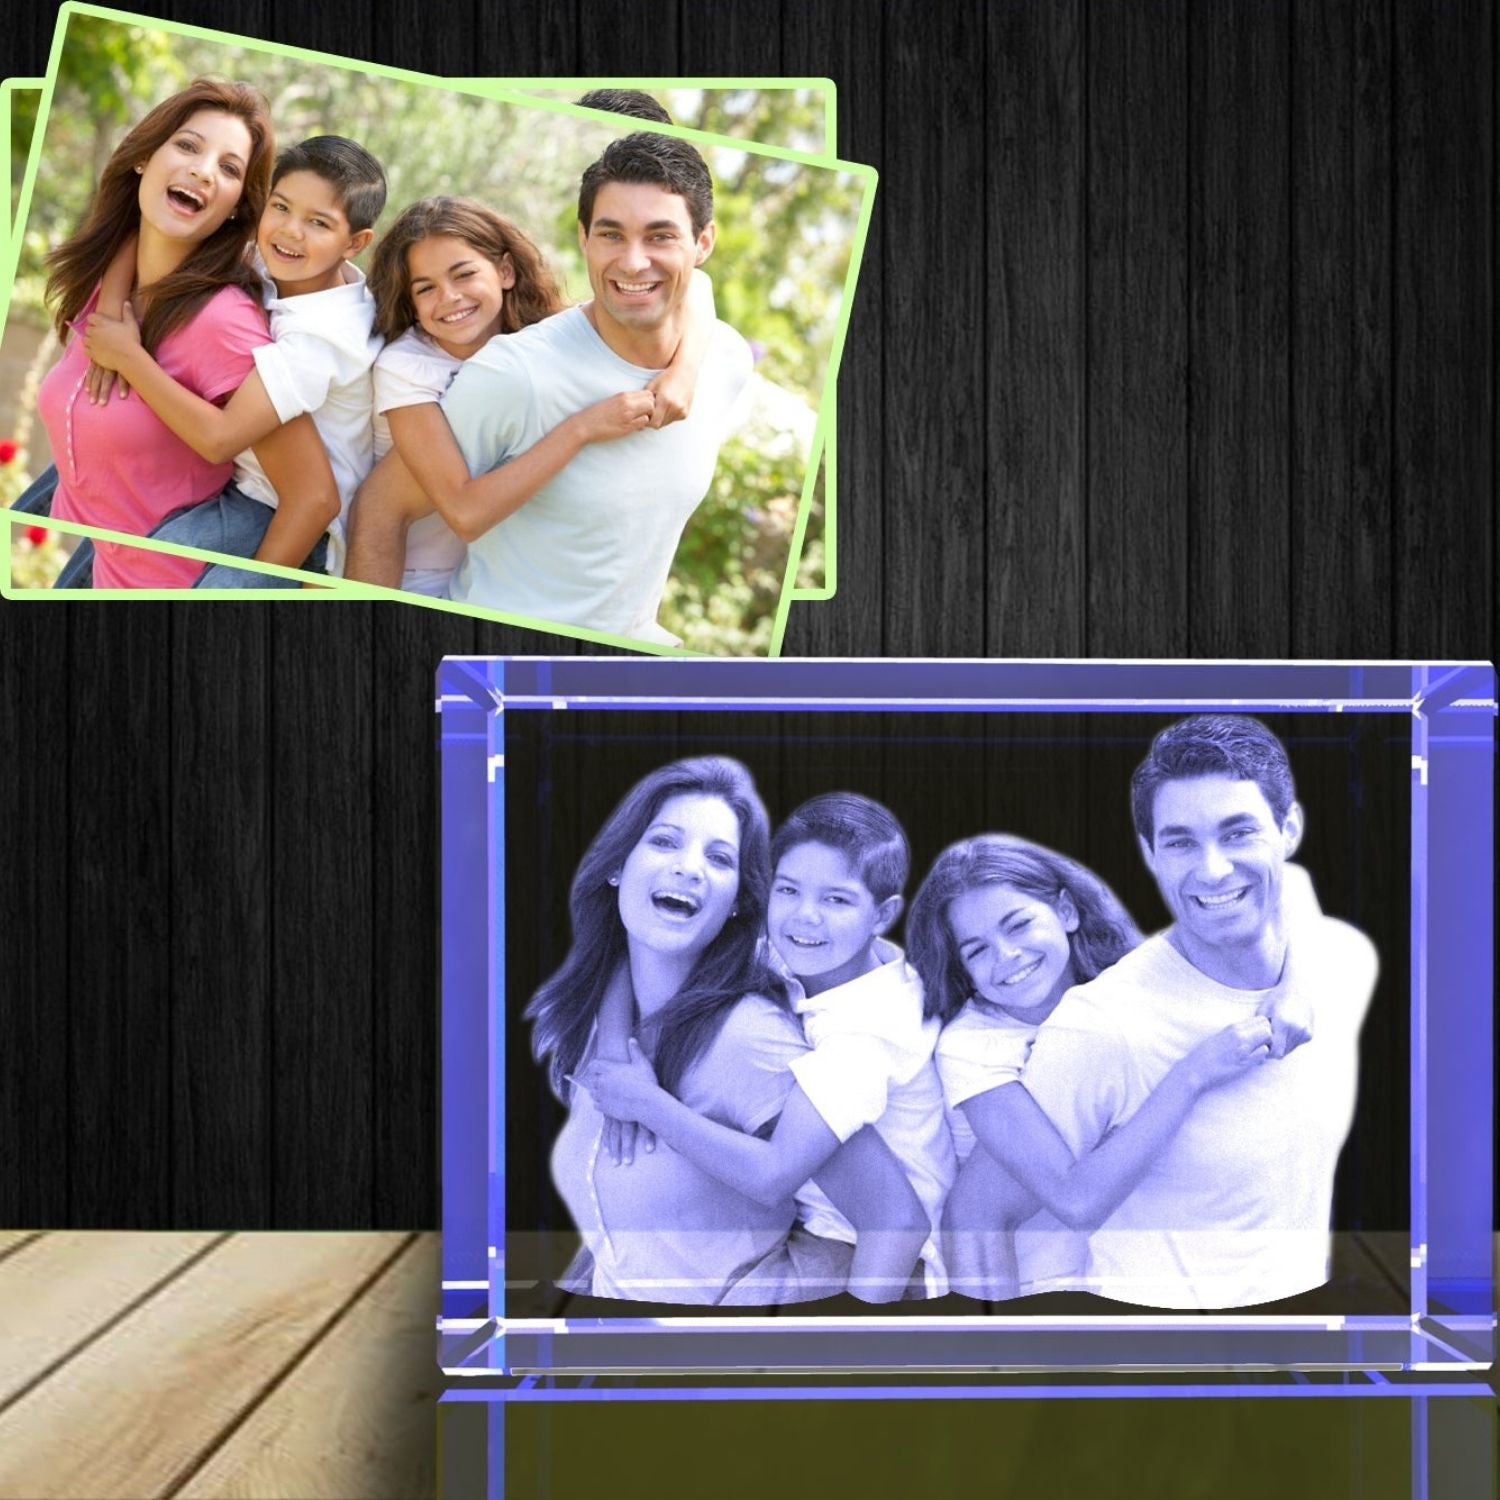 Personalized Photo Gifts A&B Crystal Collection